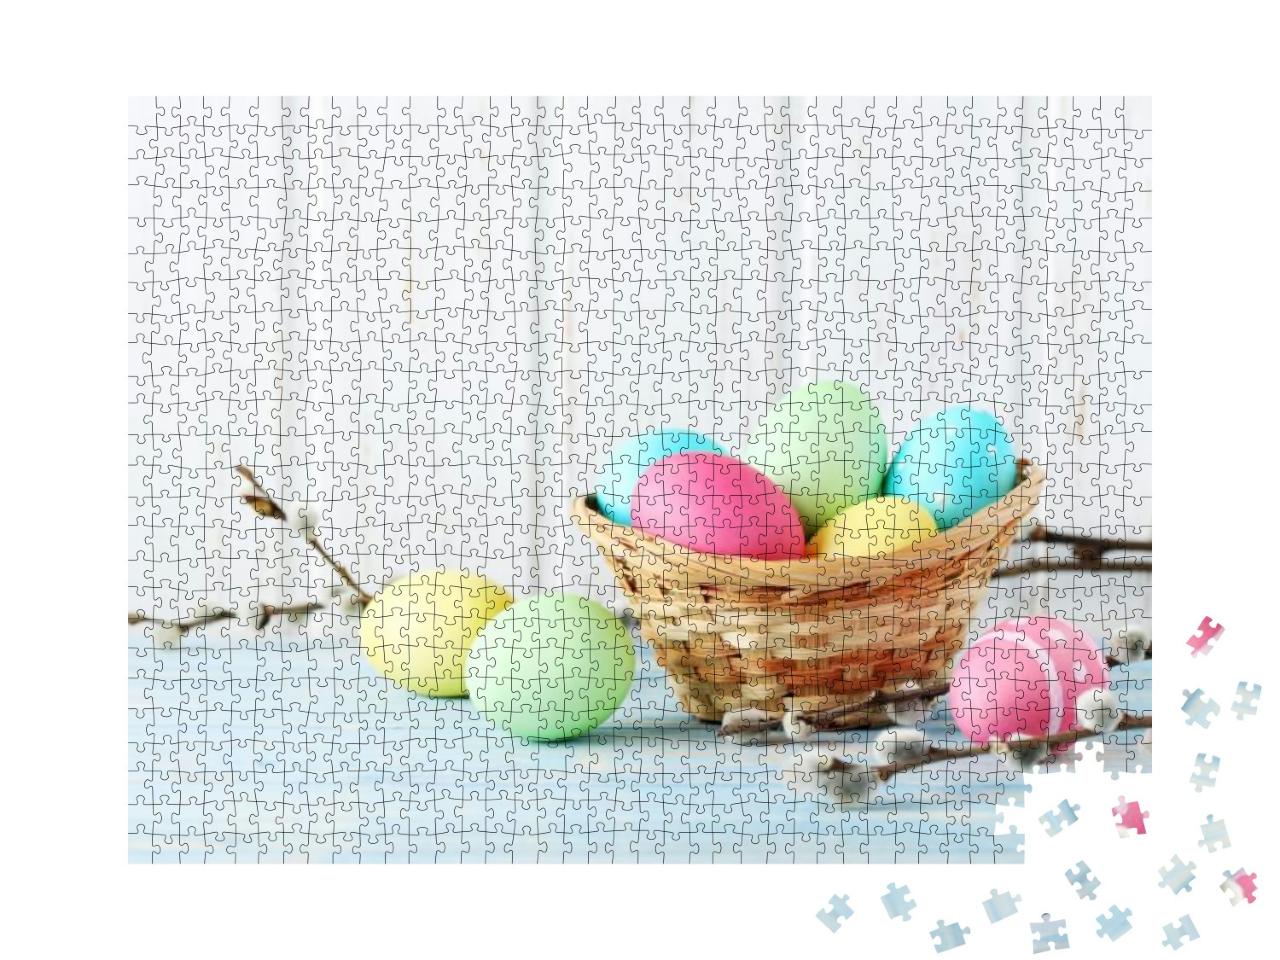 Easter Eggs on a Blue Wooden Table... Jigsaw Puzzle with 1000 pieces